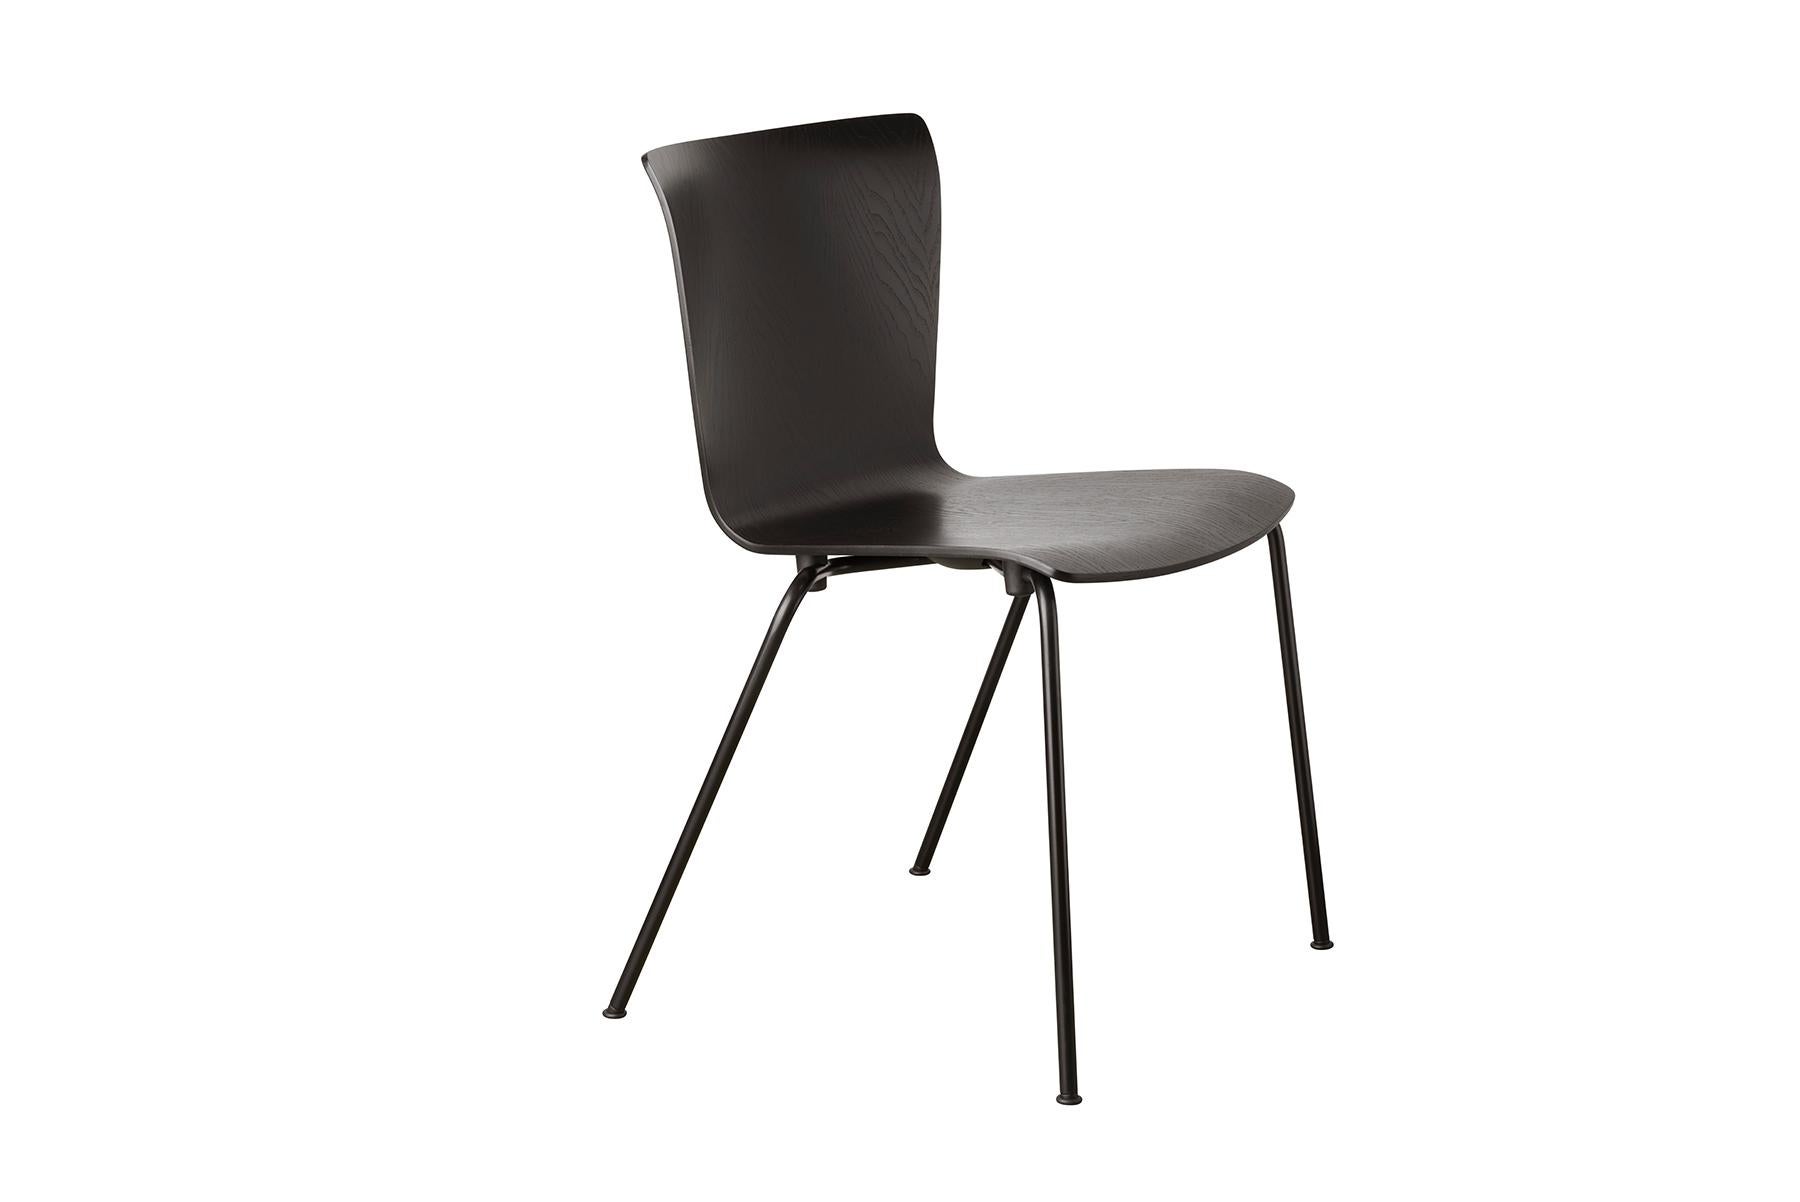 The Vico Duo is a stylish veneer stacking chair by Vico Magistretti that is versatile and perfectly suited for agile workspace and hospitality design.

Fritz Hansen reissues the Vico Duo chair in celebration of the 100th anniversary of Vico